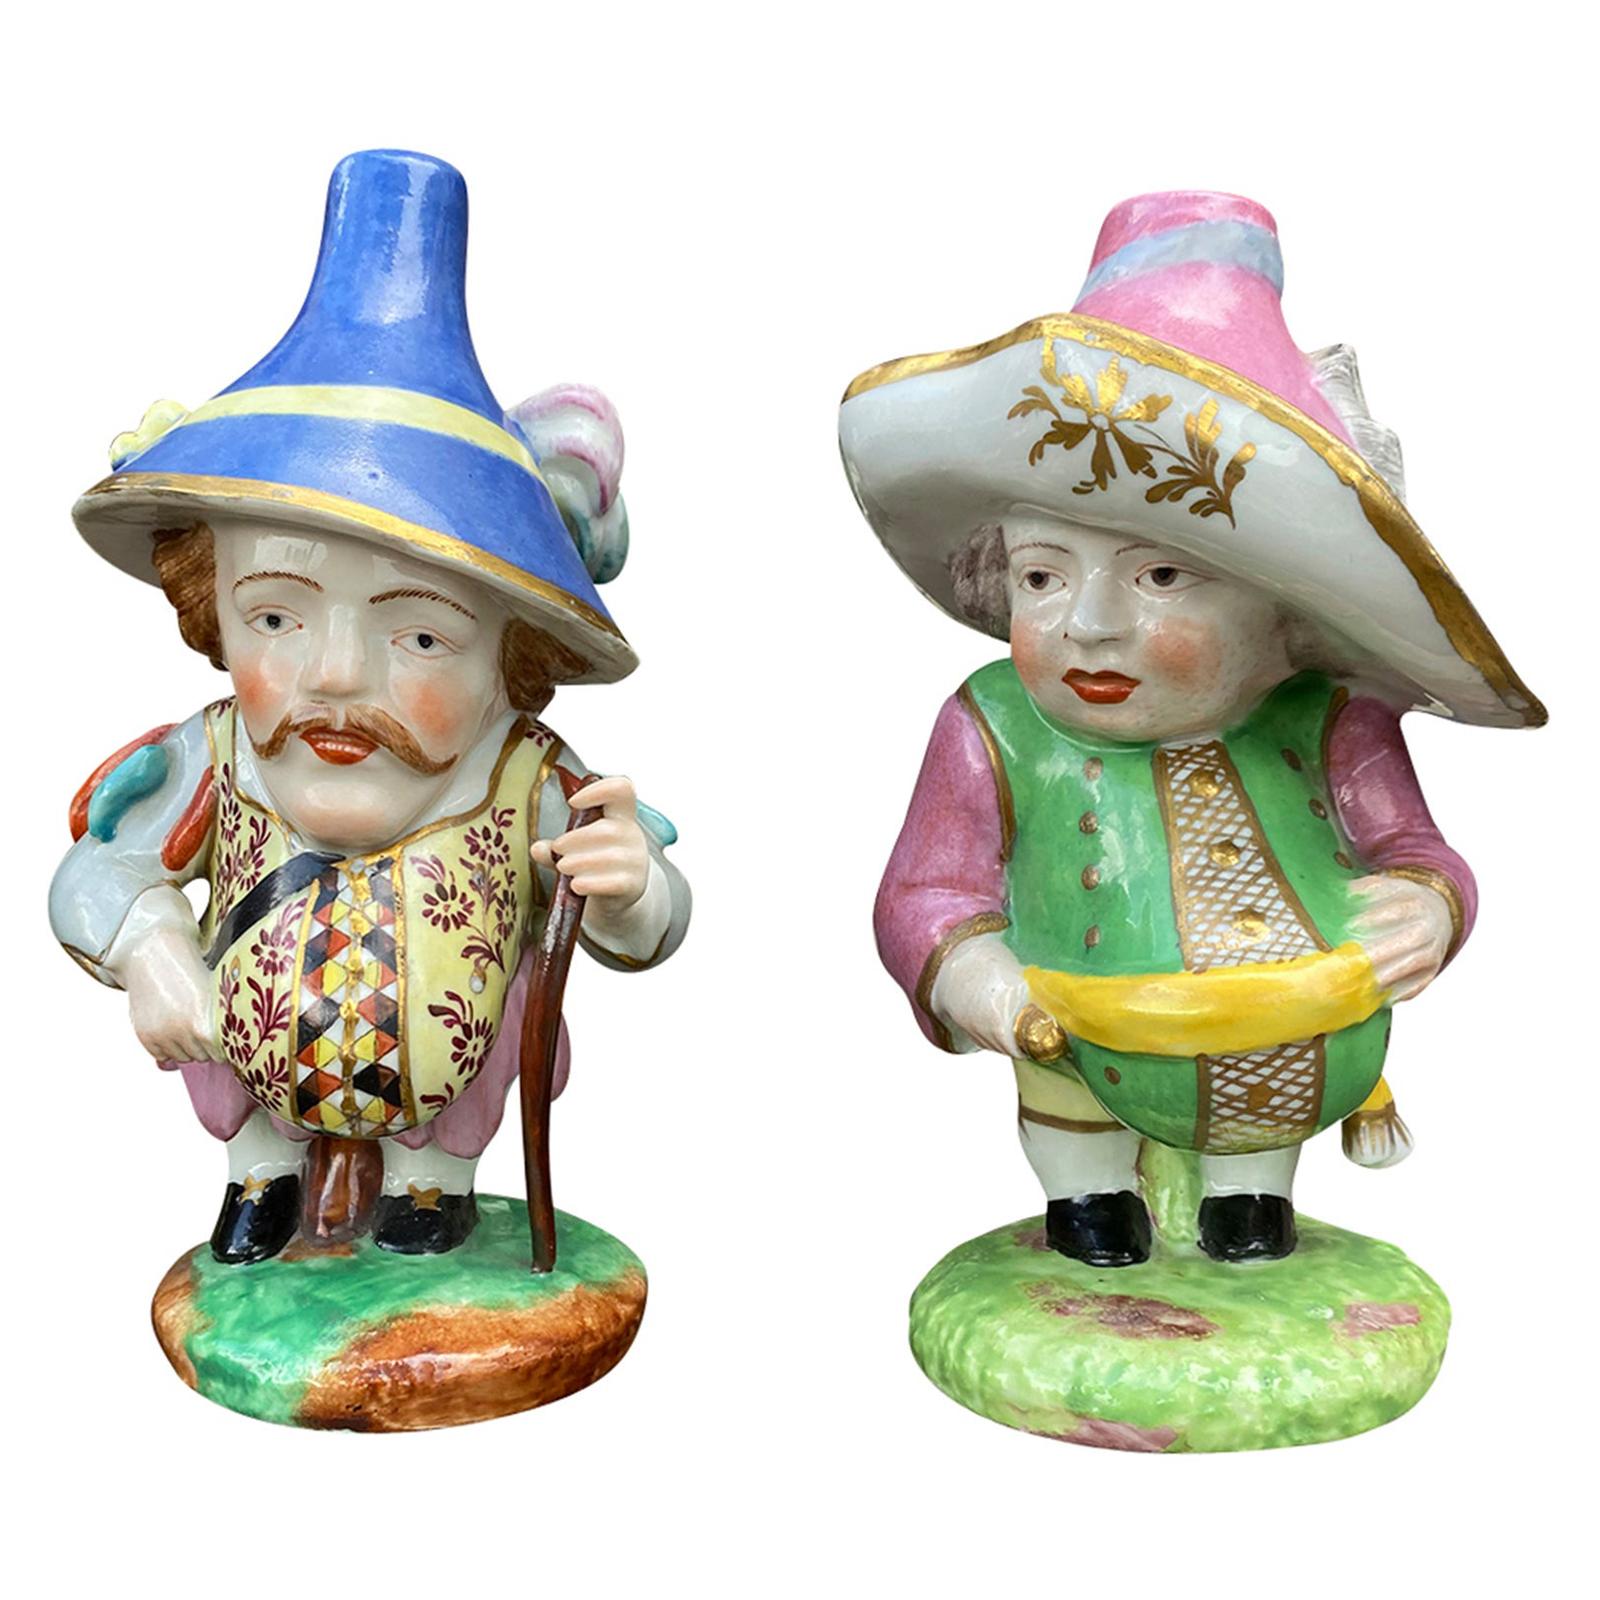 Pair of 18th Century English Attributed to Derby Porcelain Dwarfs For Sale